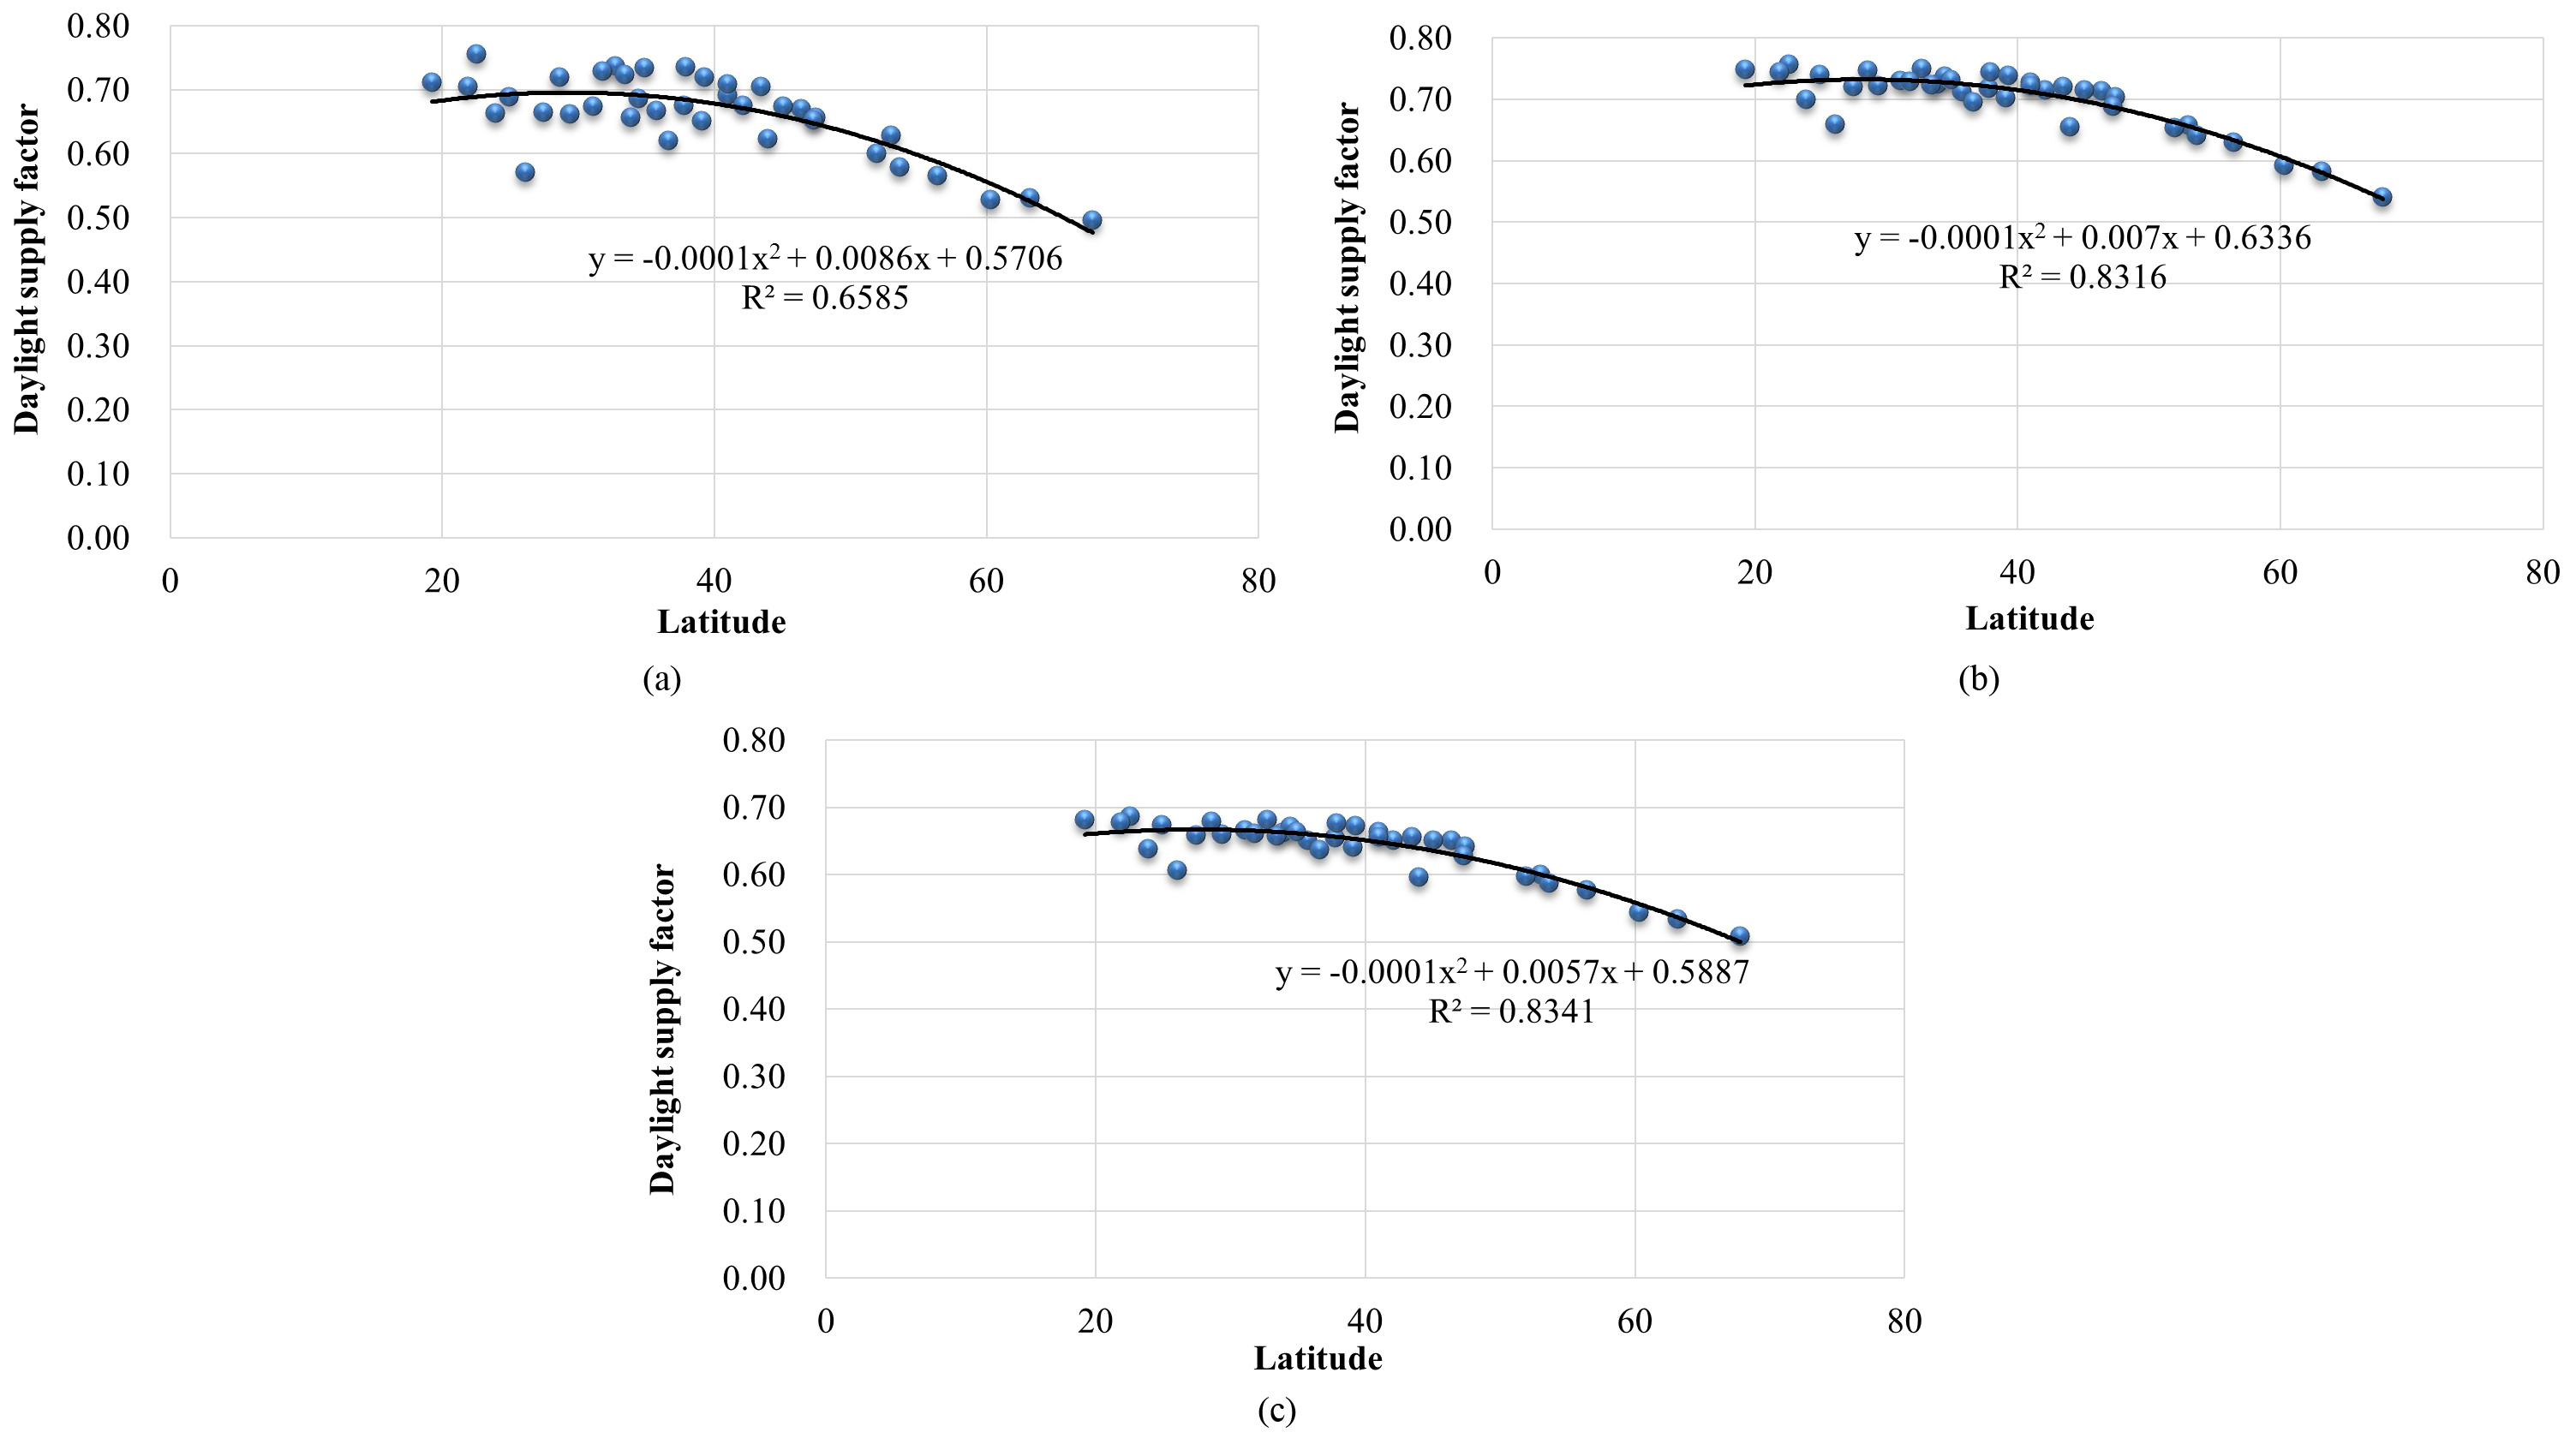 Relationship between daylight supply factor and latitude for different daylight penetration with 500 lux maintained illuminance for (a) weak, (b) medium, and (c) strong daylight penetration model.